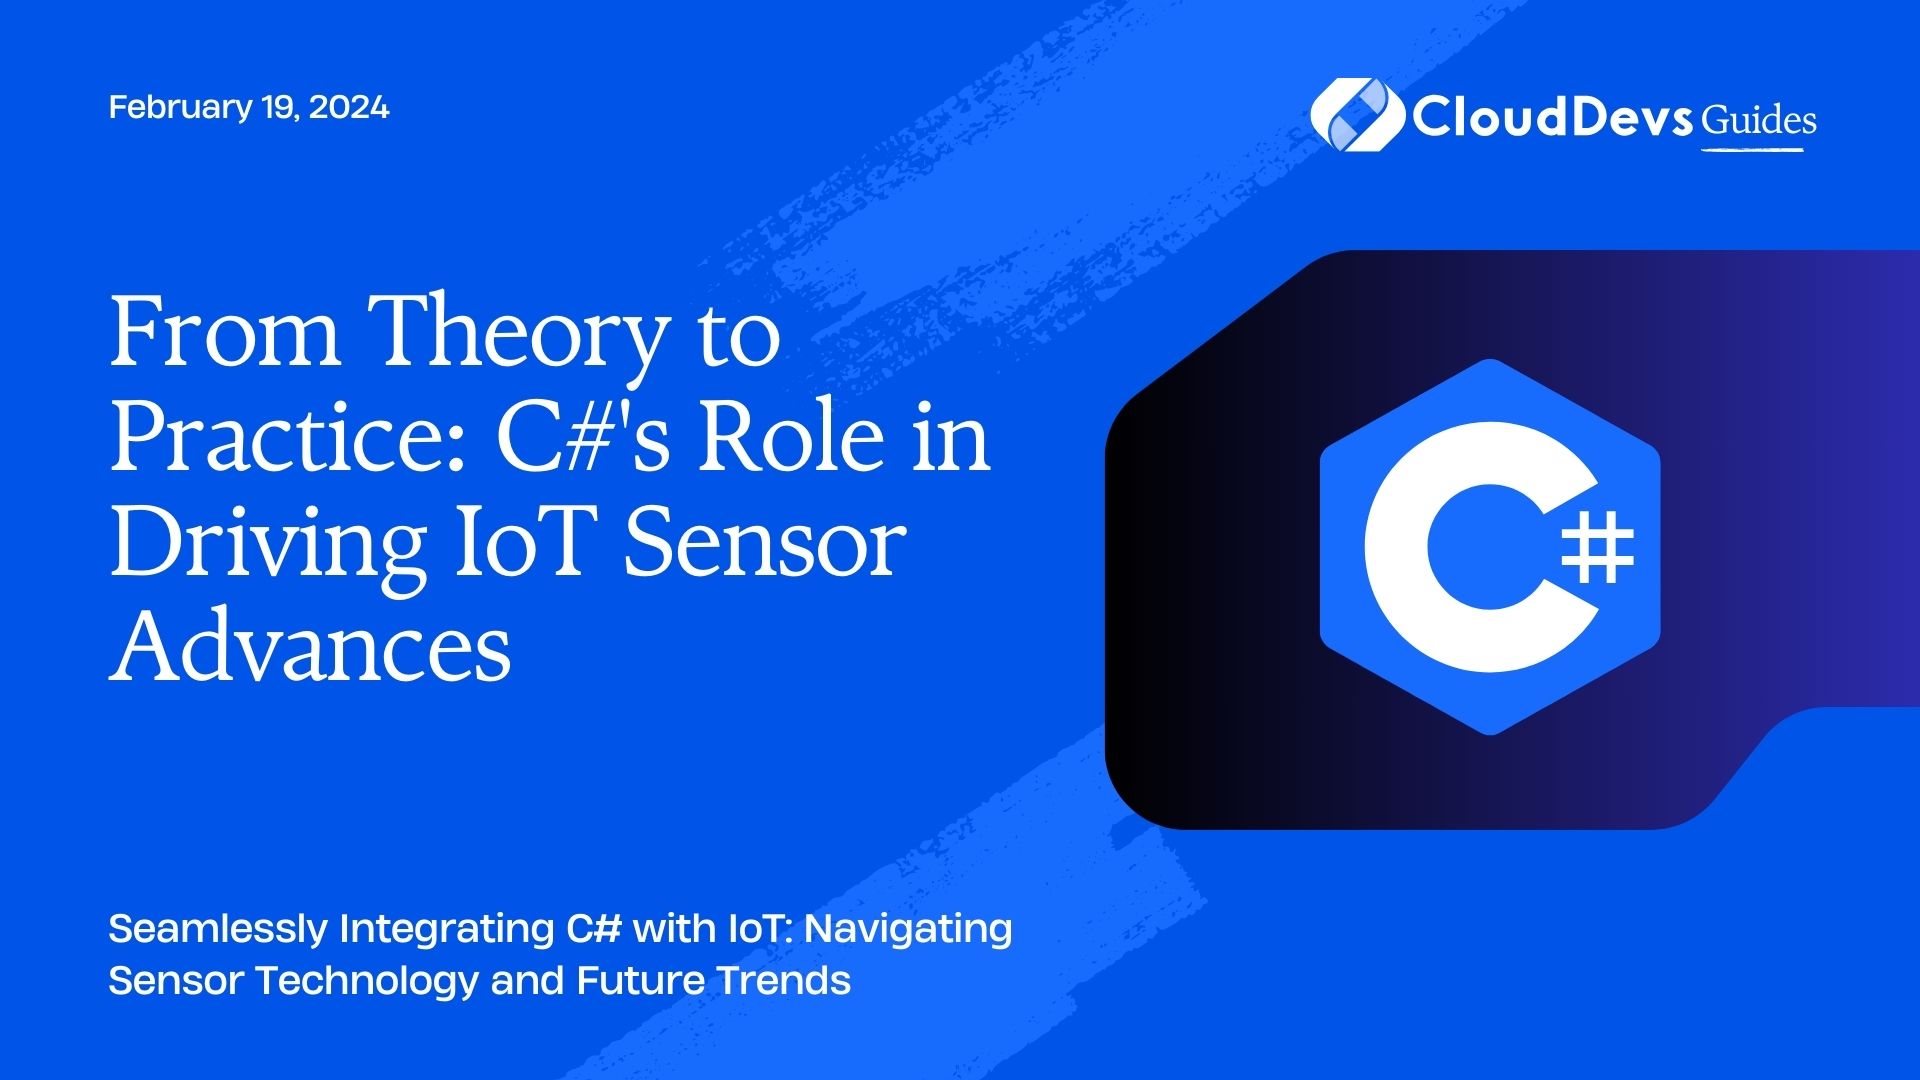 From Theory to Practice: C#'s Role in Driving IoT Sensor Advances